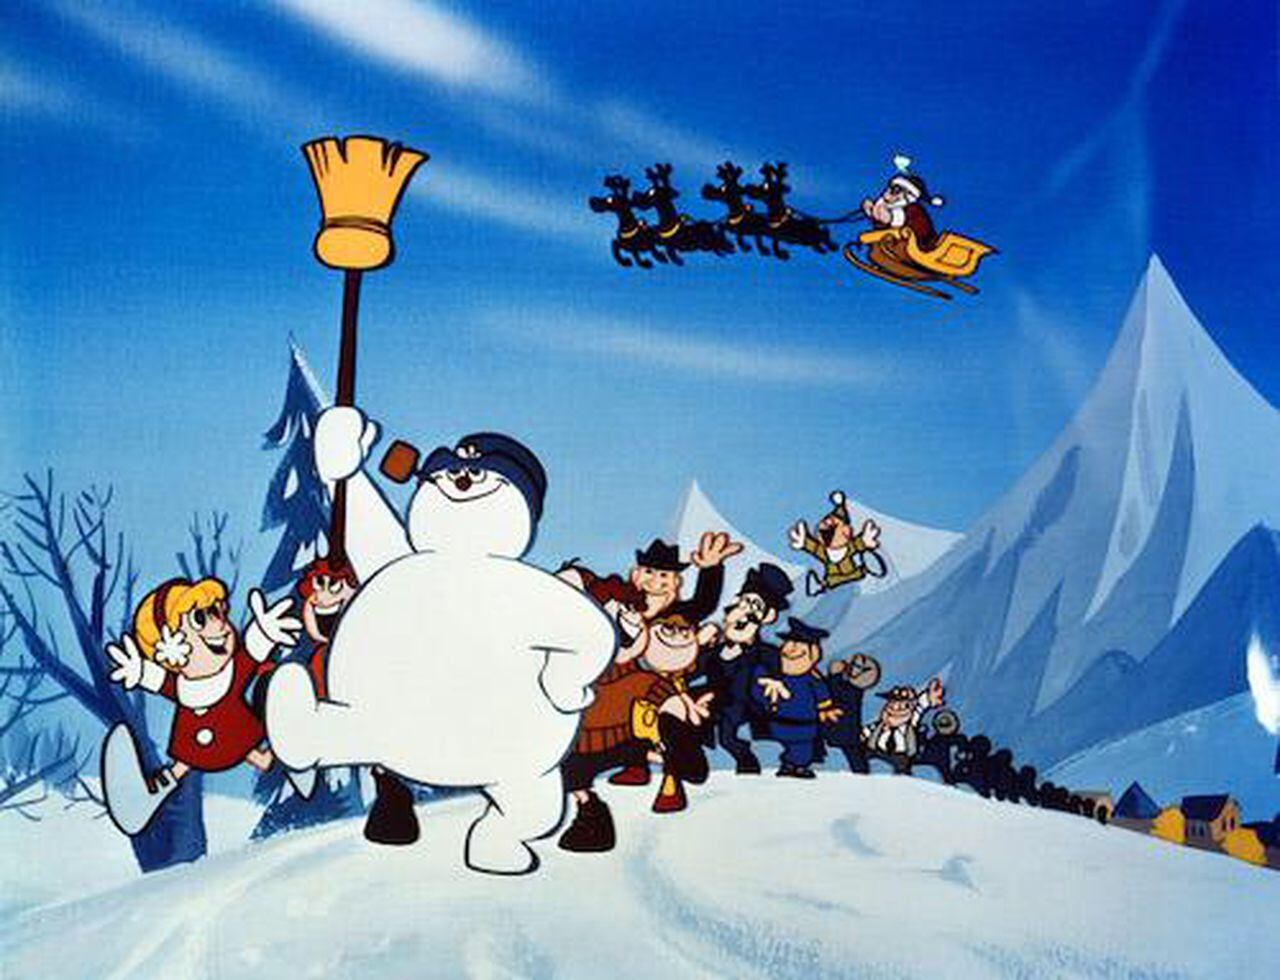 delisha khan recommends watch frosty the snowman online pic